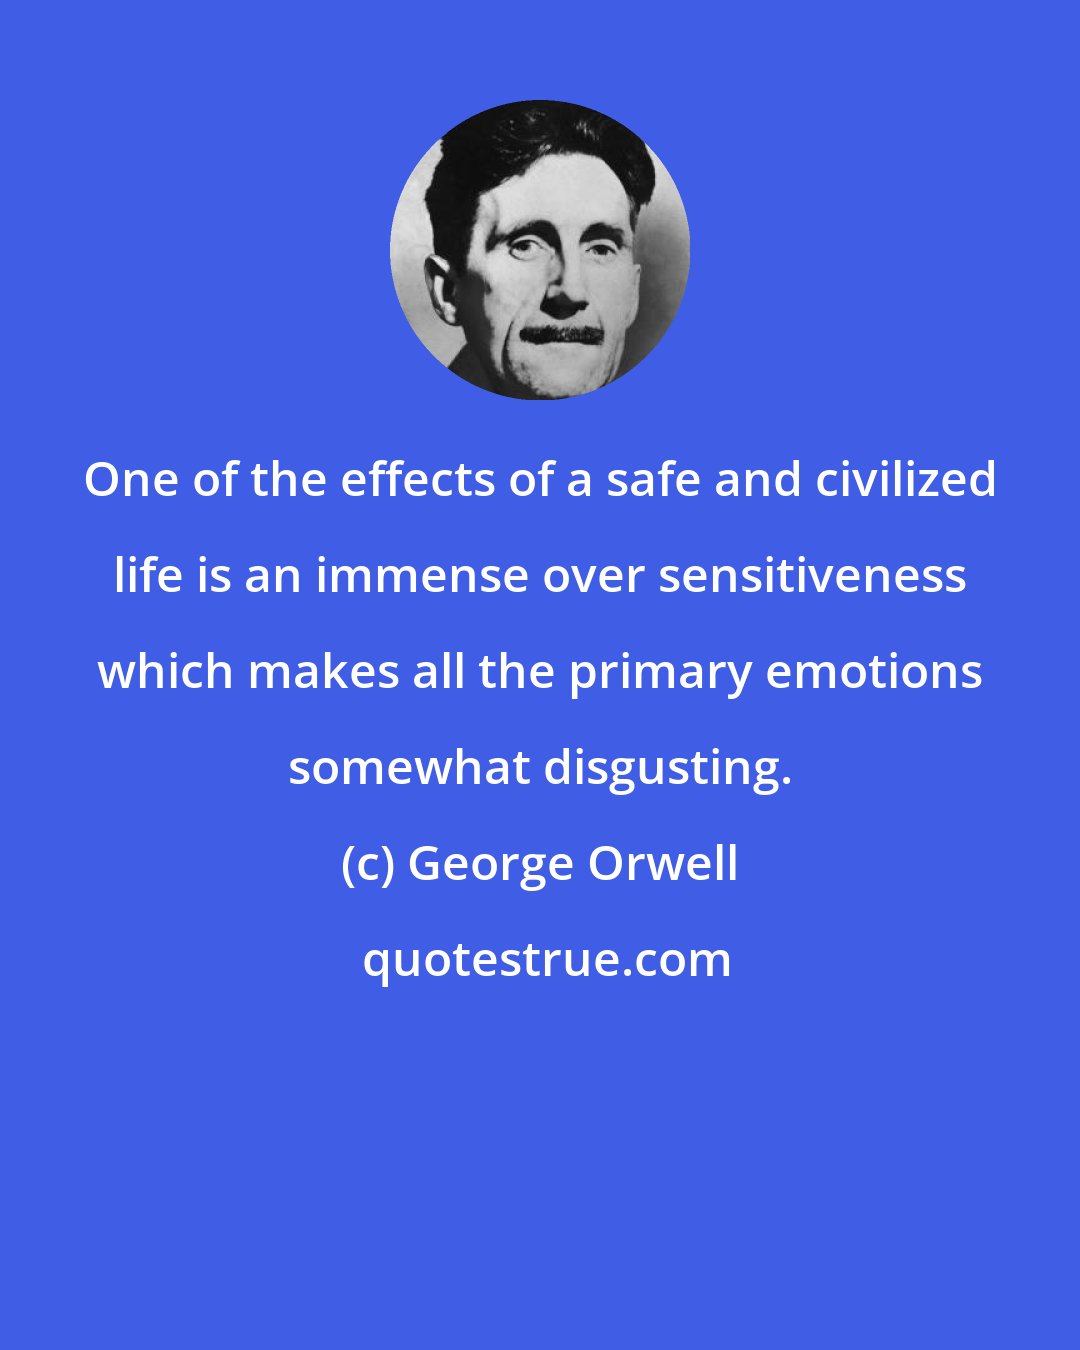 George Orwell: One of the effects of a safe and civilized life is an immense over sensitiveness which makes all the primary emotions somewhat disgusting.